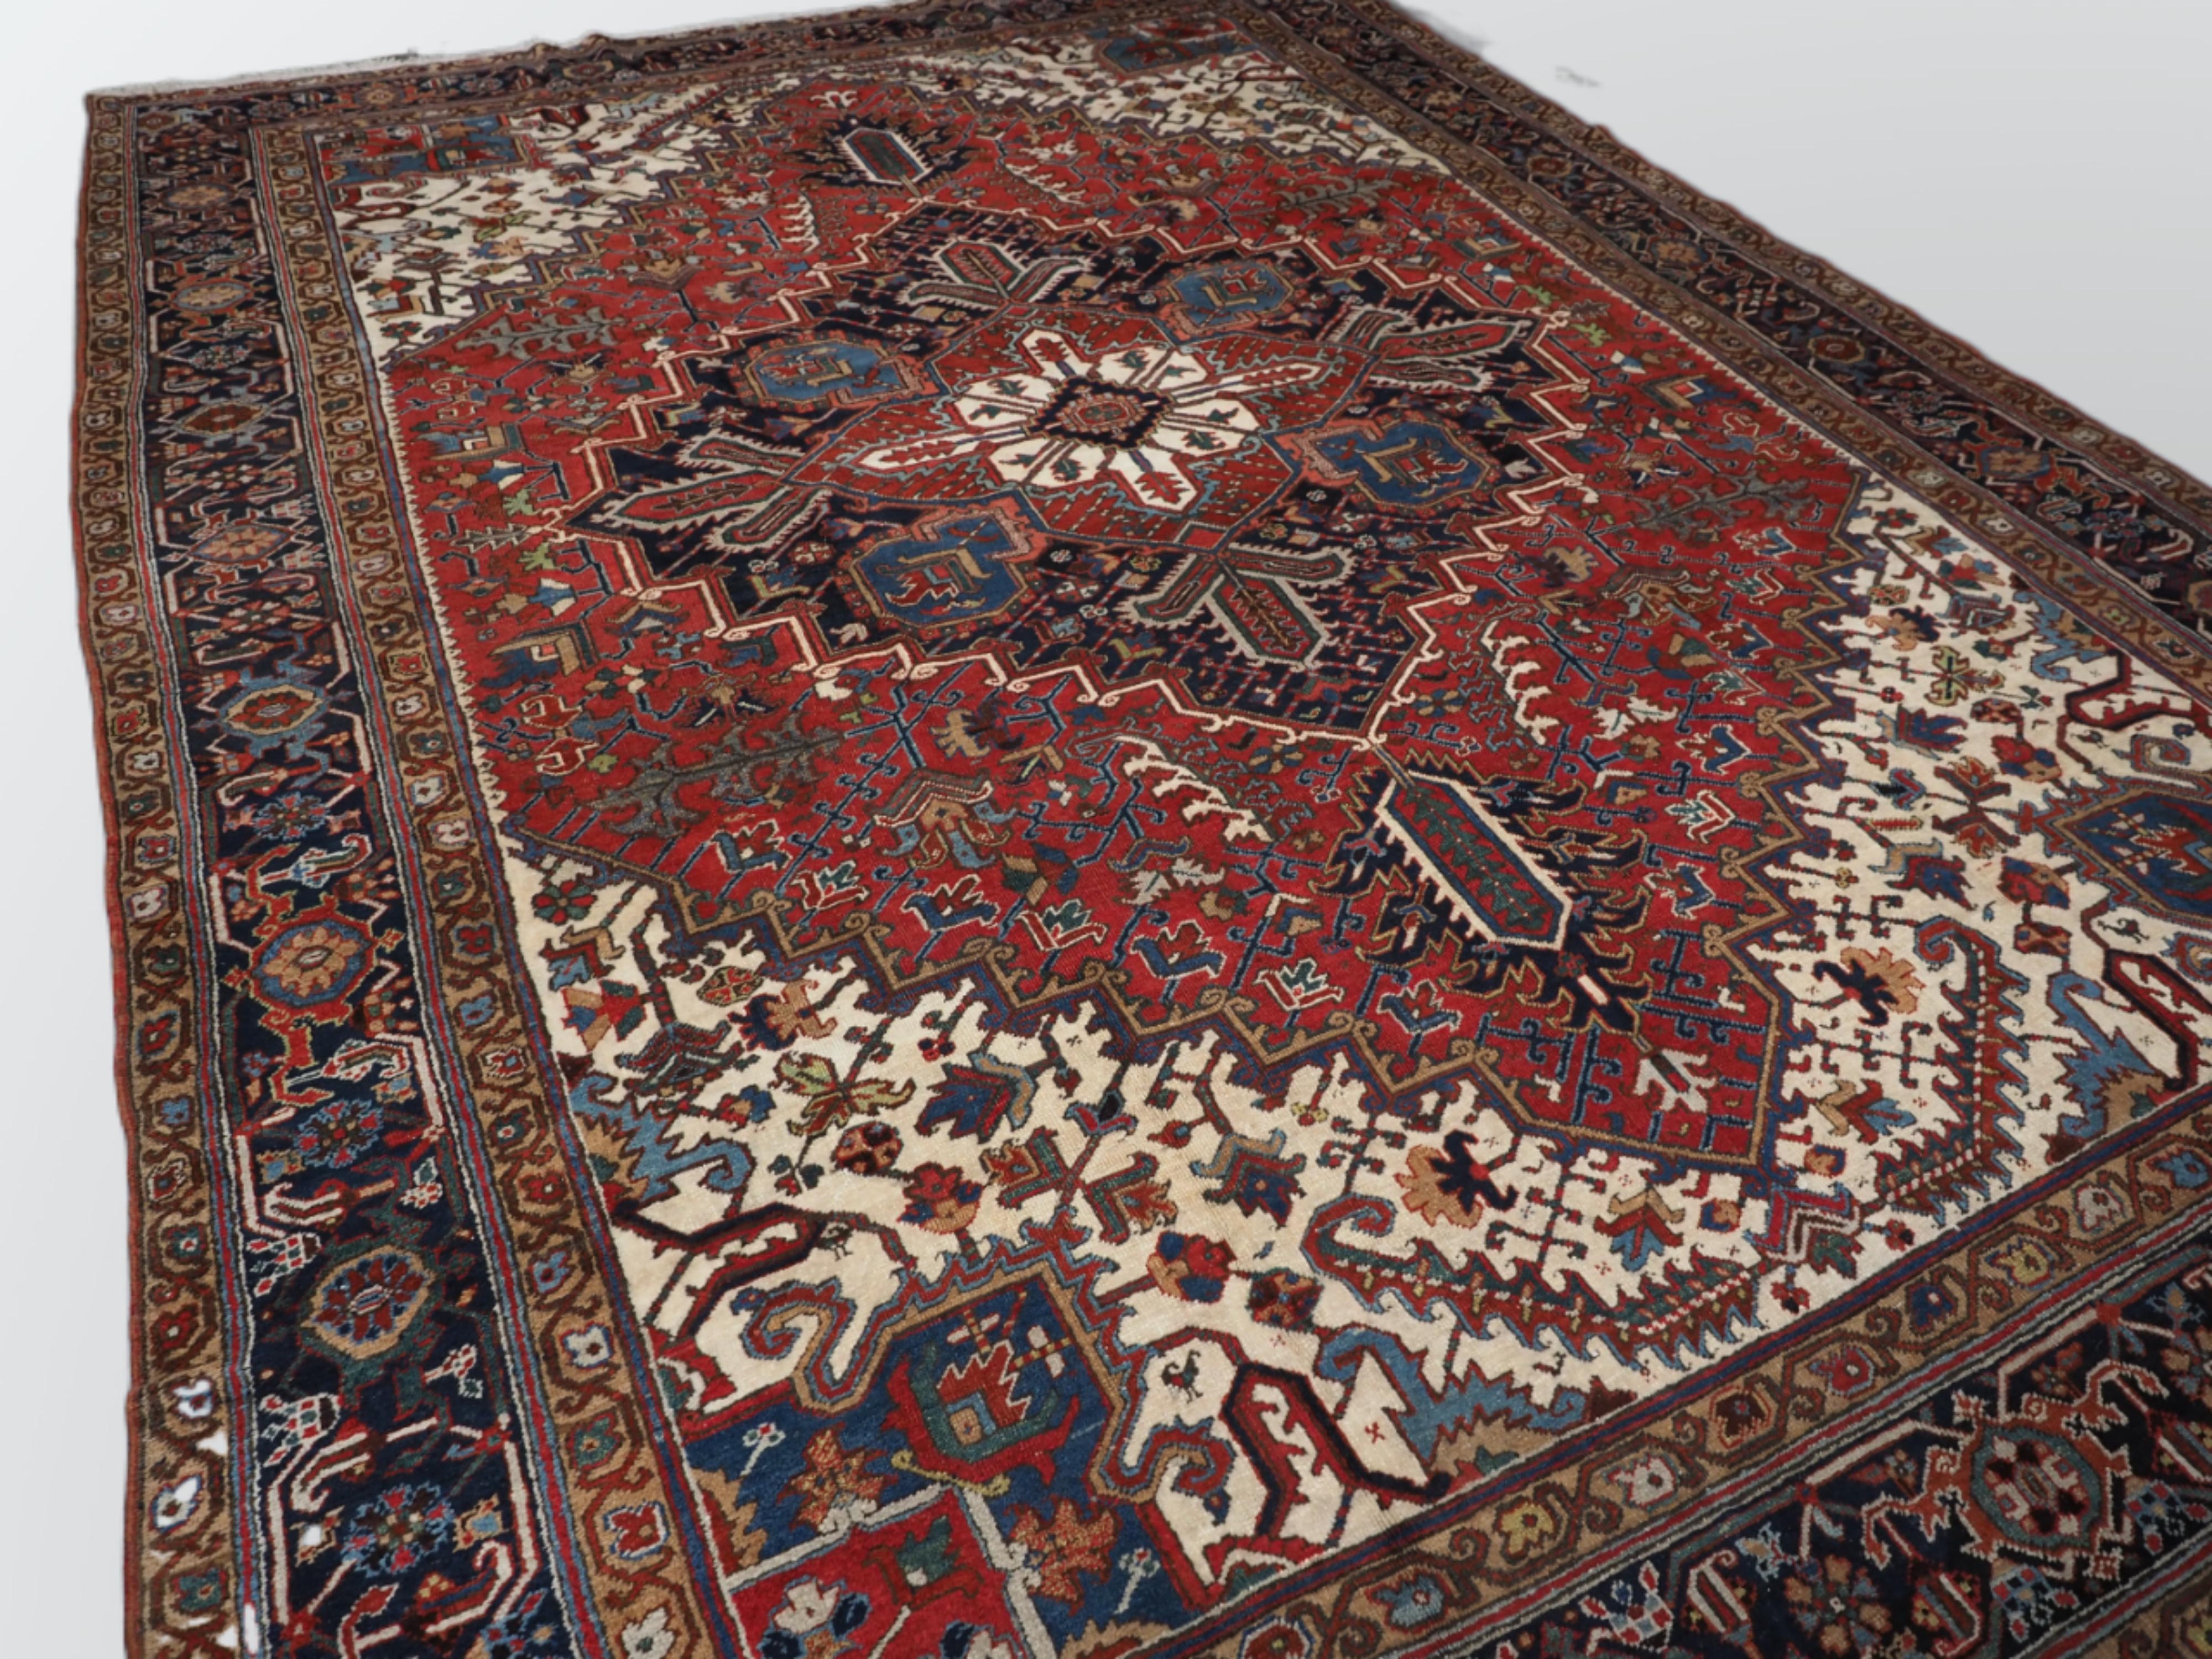 Size: 12ft 10in x 9ft 4in (390 x 285cm).

Antique Persian Heriz carpet with a traditional large medallion design with madder red field colour. Classic dark indigo blue border that is very well drawn. The large central medallion in dark indigo blue